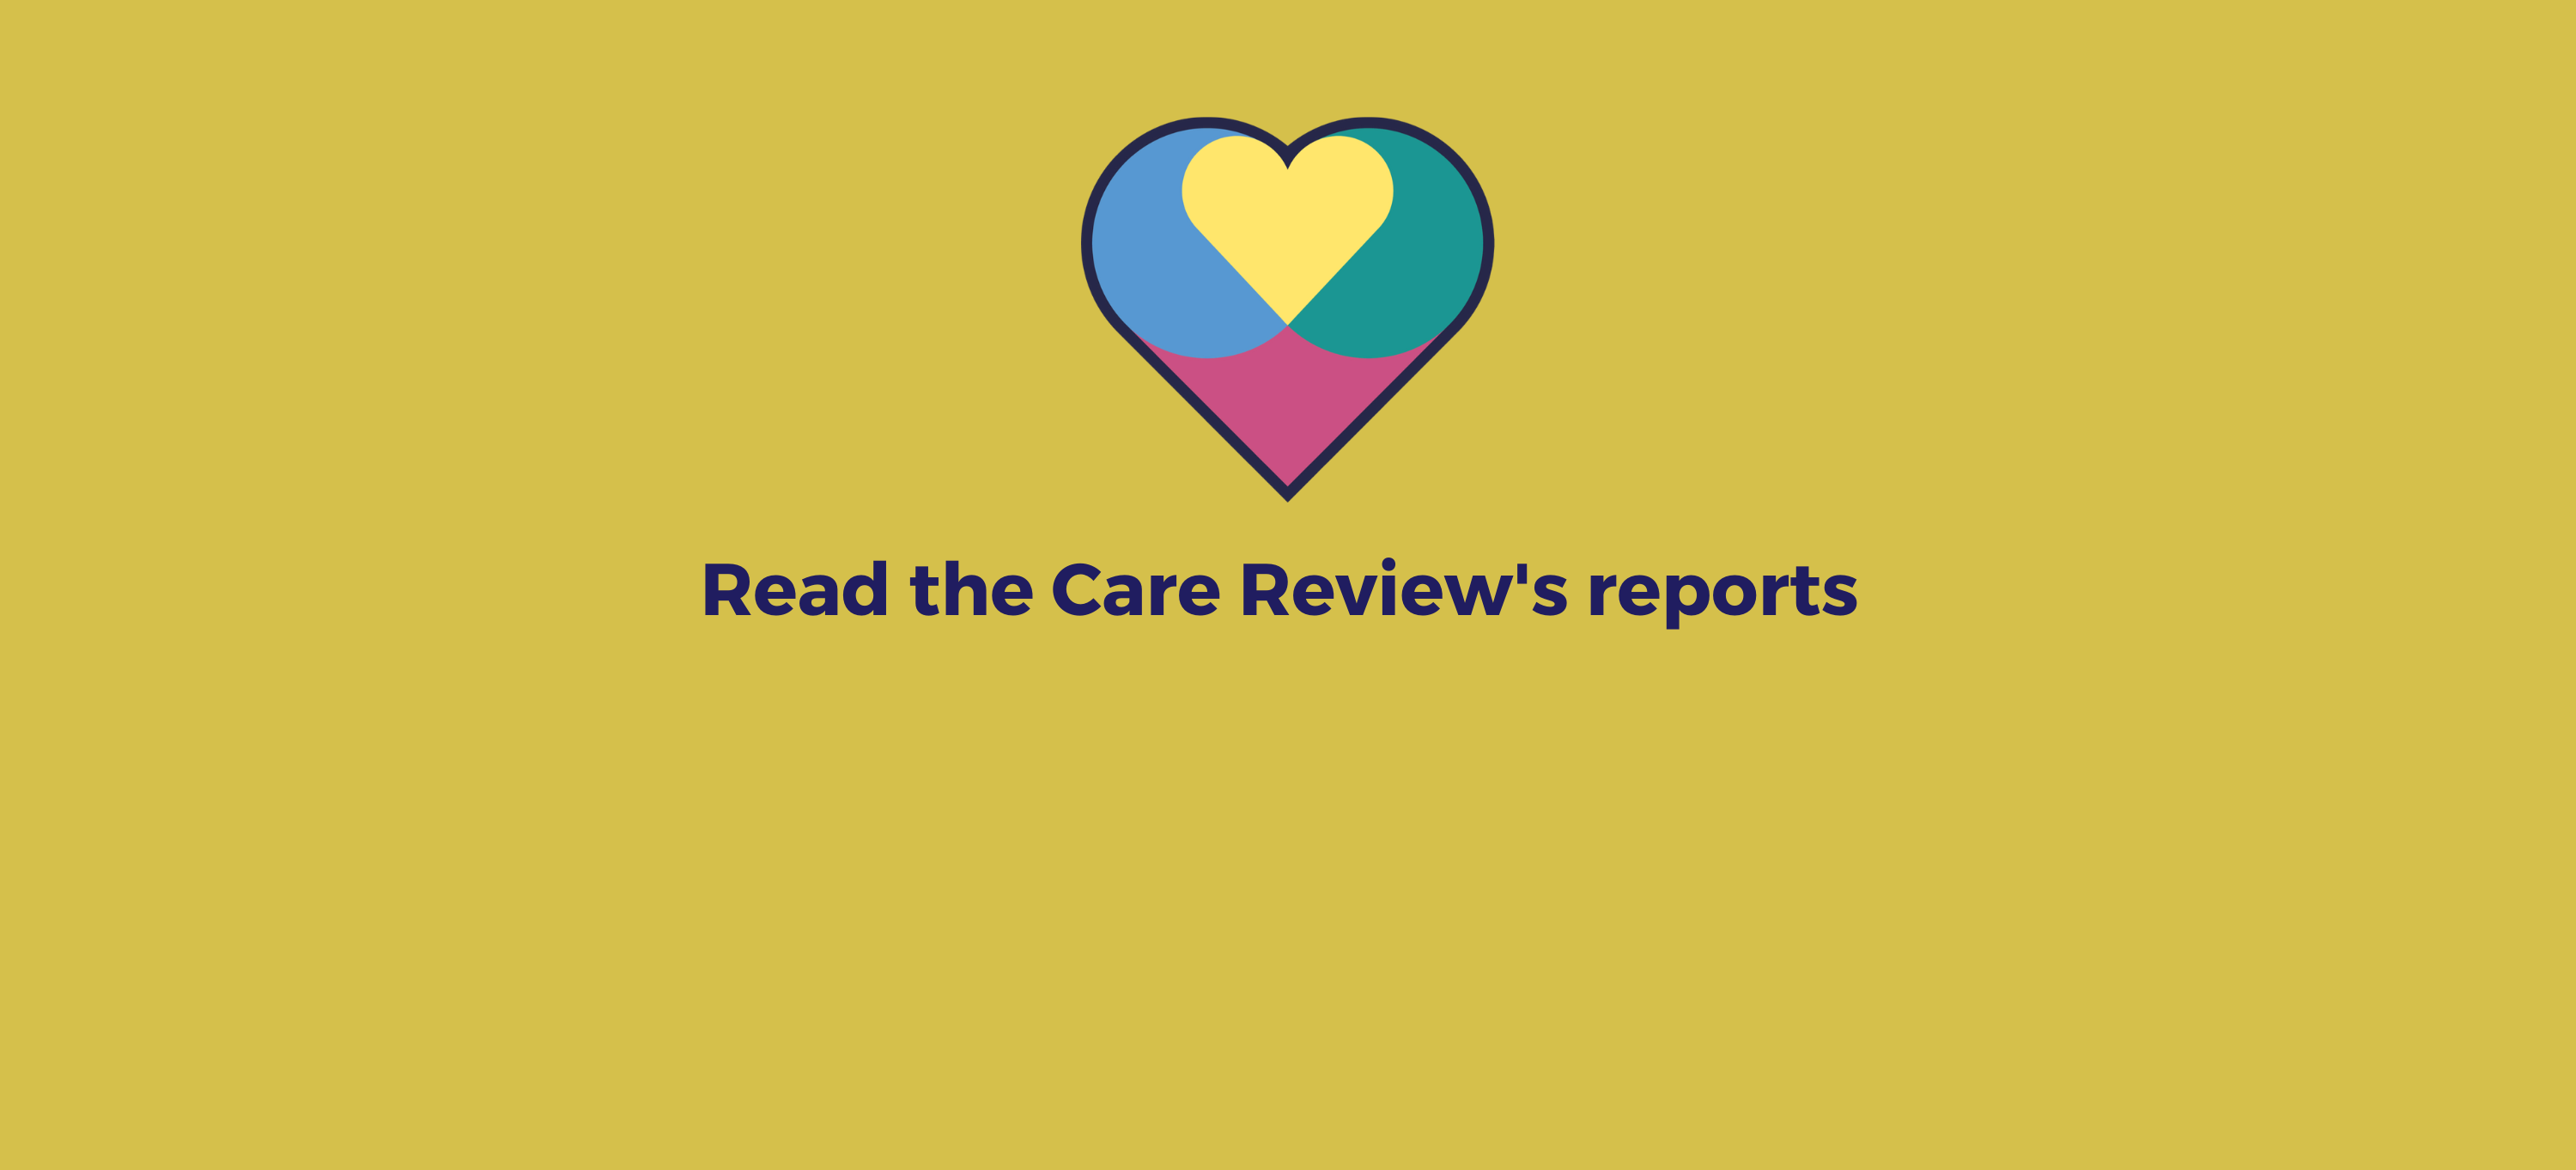 Read the care review's reports